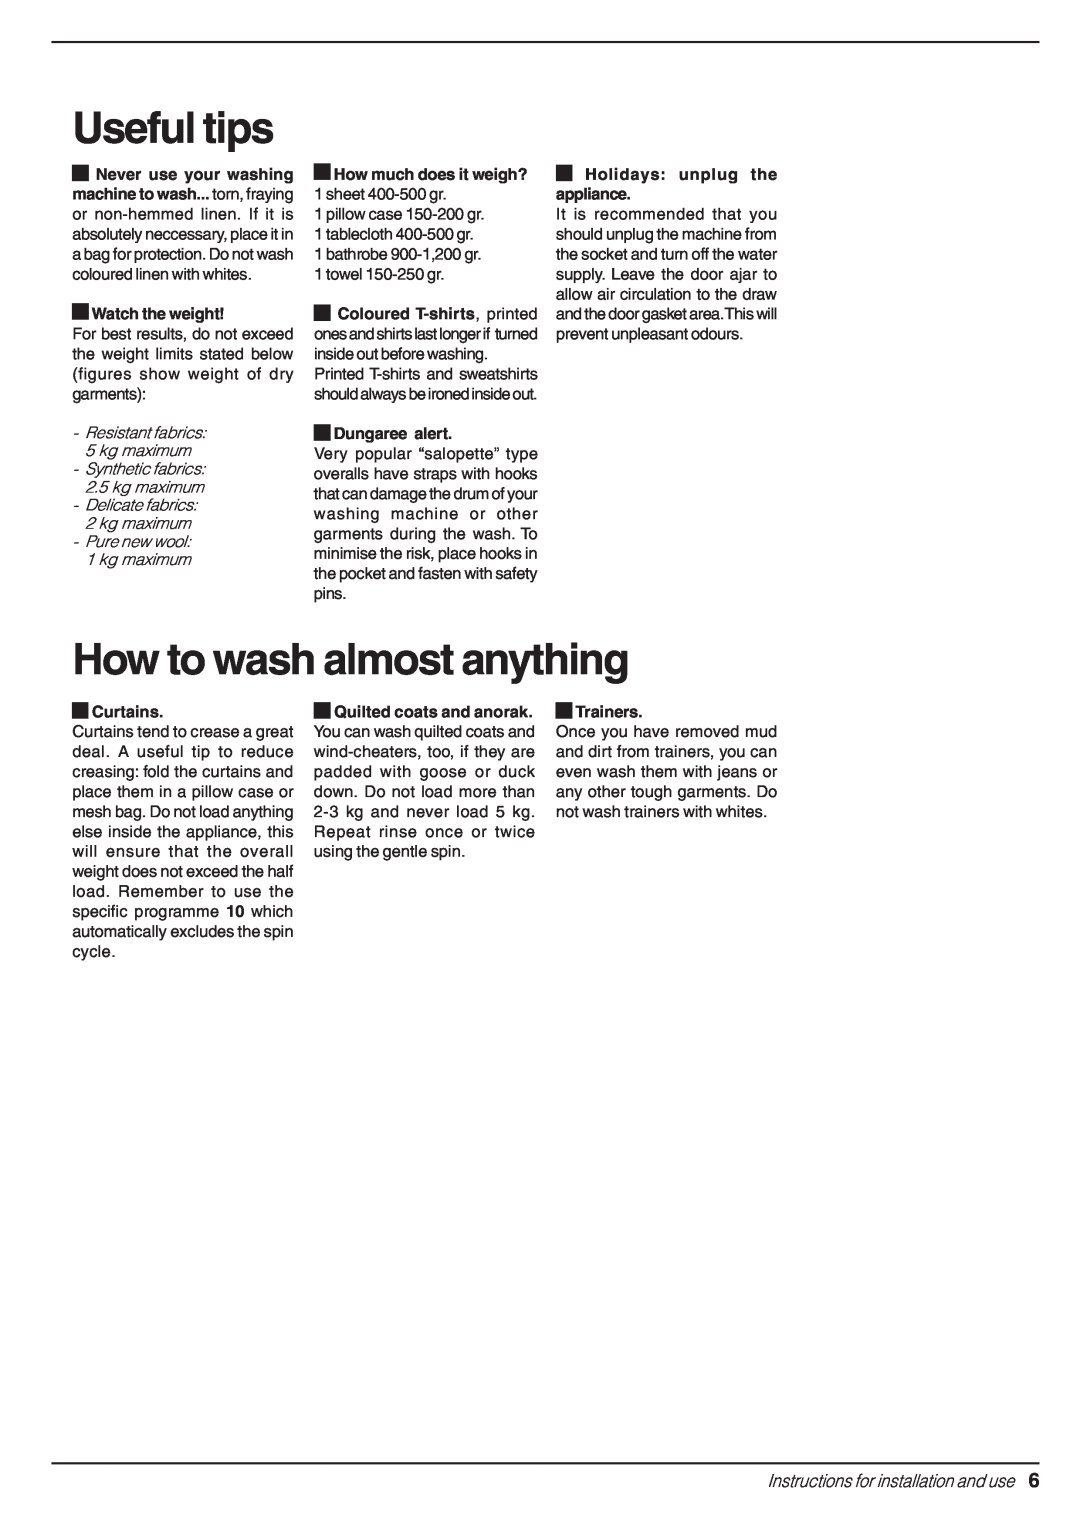 Indesit W 103 Useful tips, How to wash almost anything, Instructions for installation and use, Watch the weight, Curtains 